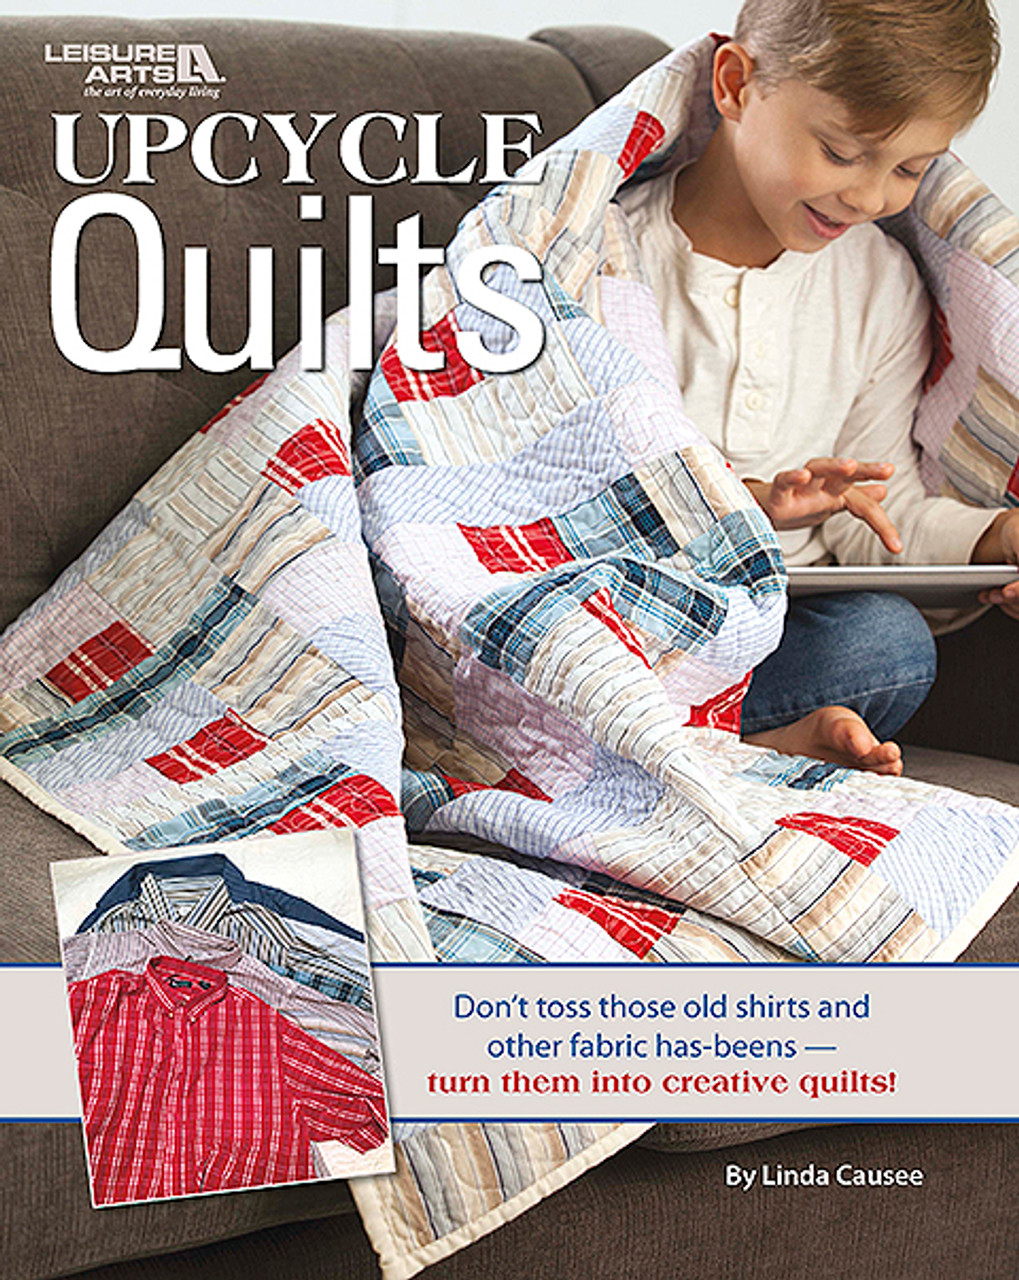 Quilter's Newsprint, Products